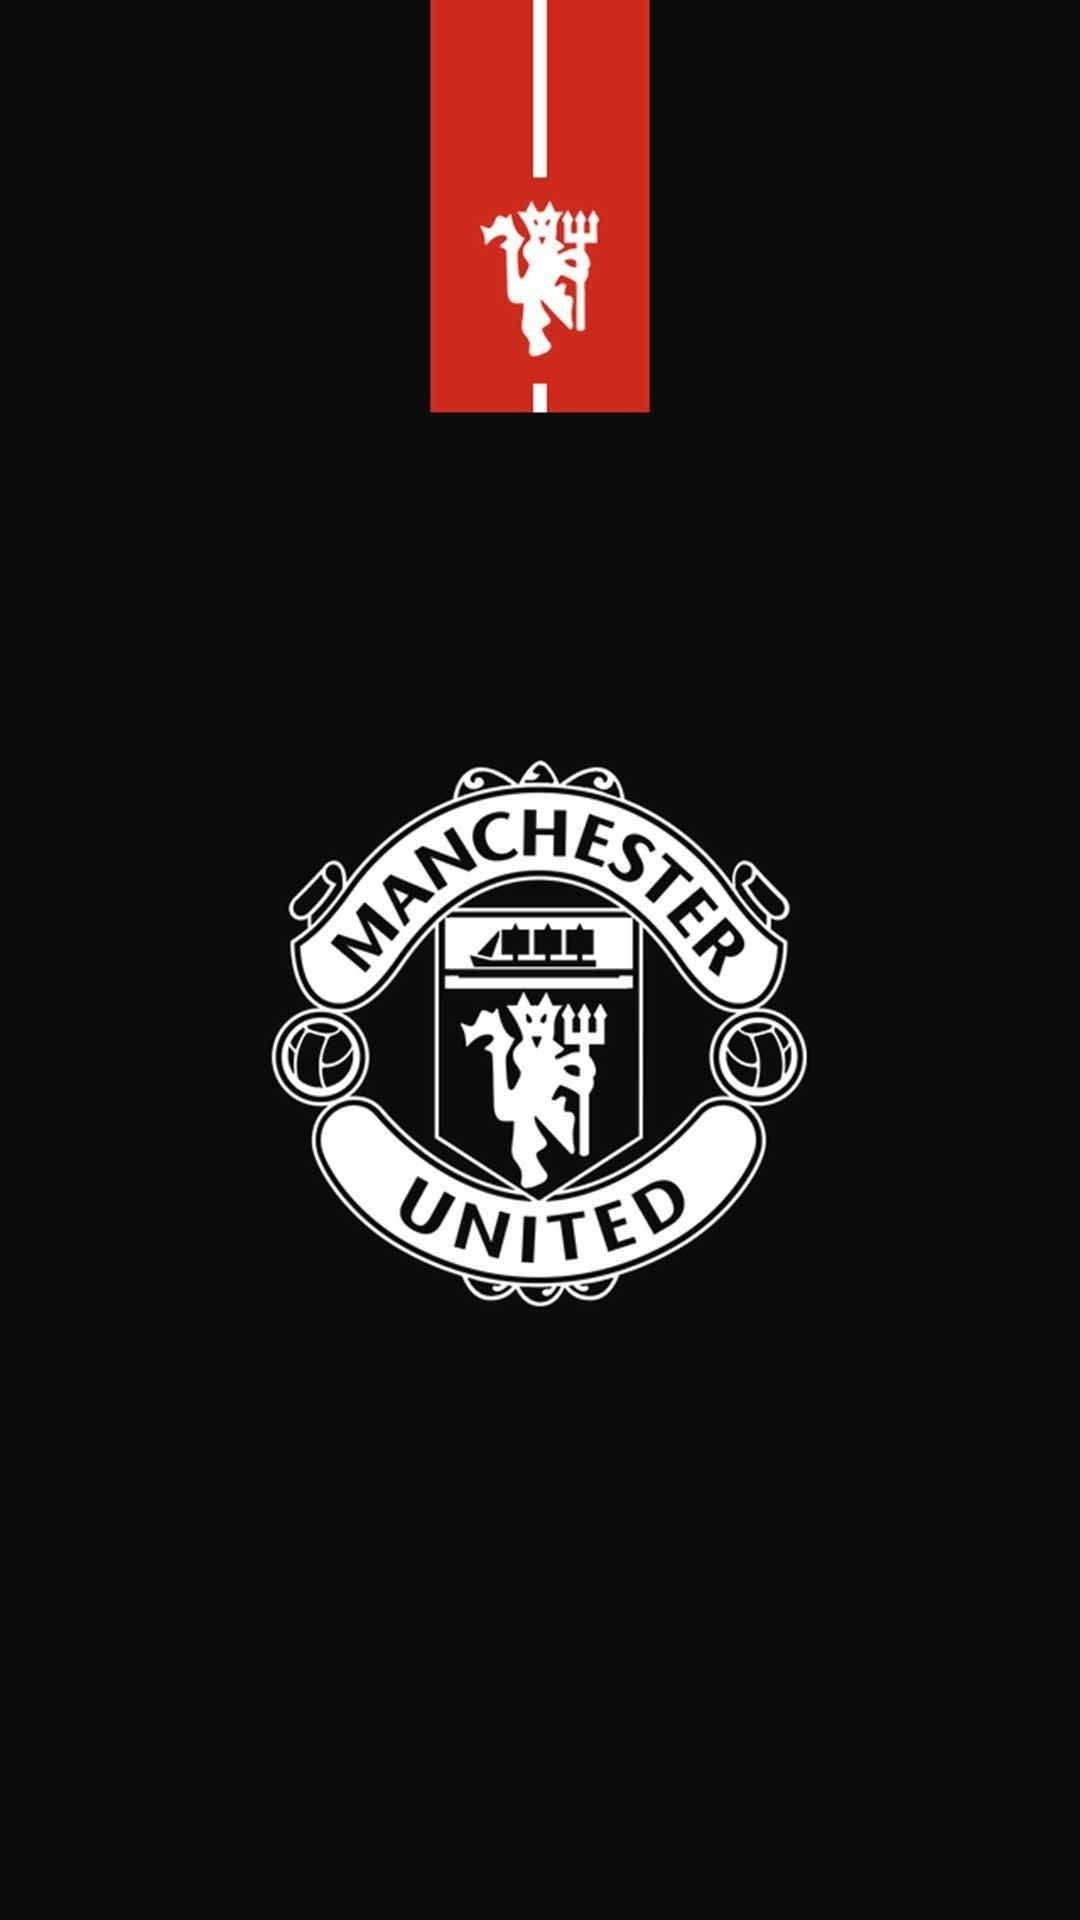 HD wallpaper, Manchester United, Iphone Full Hd Manchester United Background Photo, 25130, Red Devils, Sports Theme, 1080X1920 Full Hd Phone